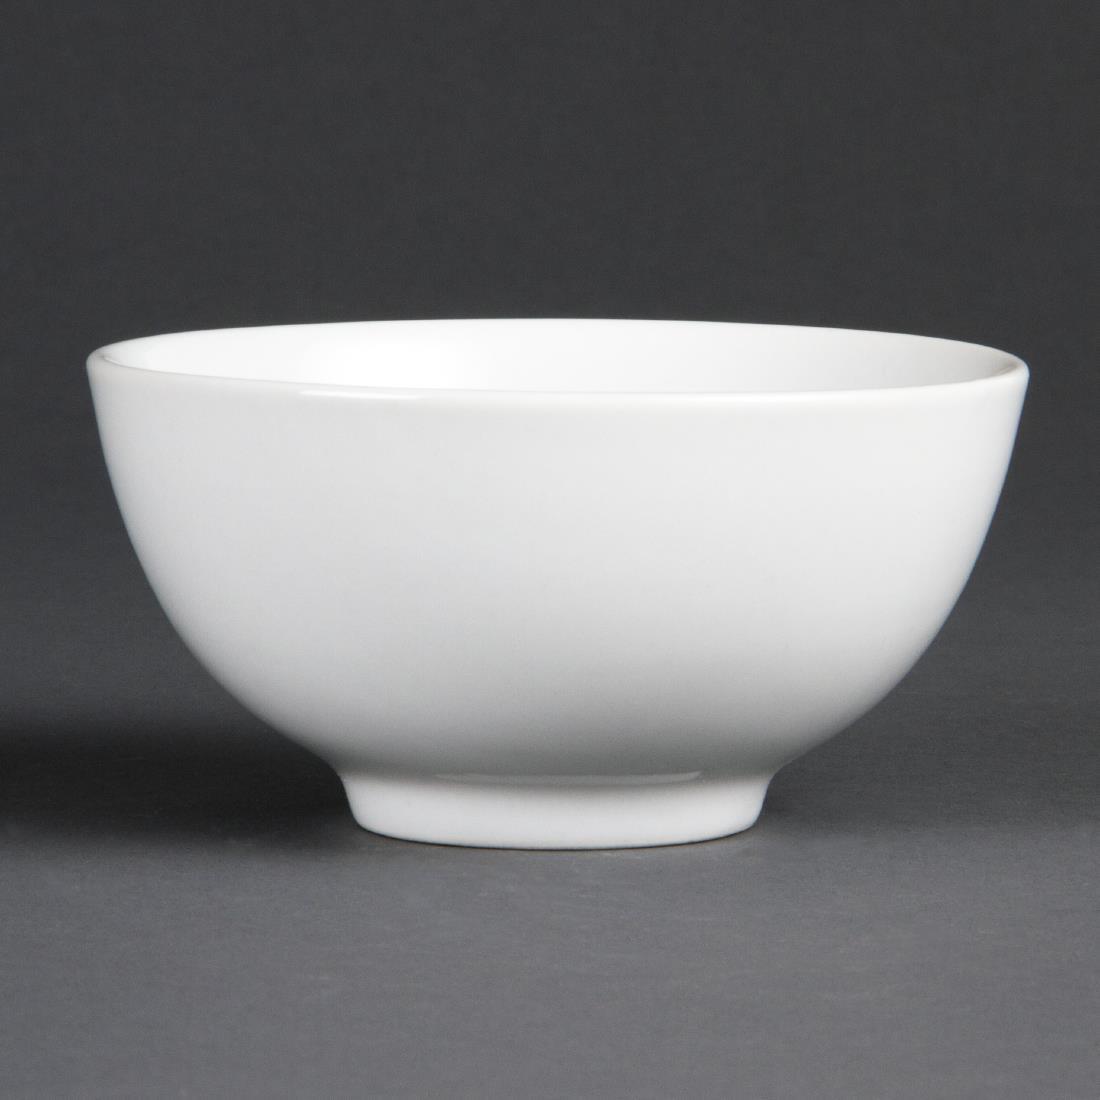 Olympia Whiteware Rice Bowls 130mm 390ml (Pack of 12) - C253  - 1